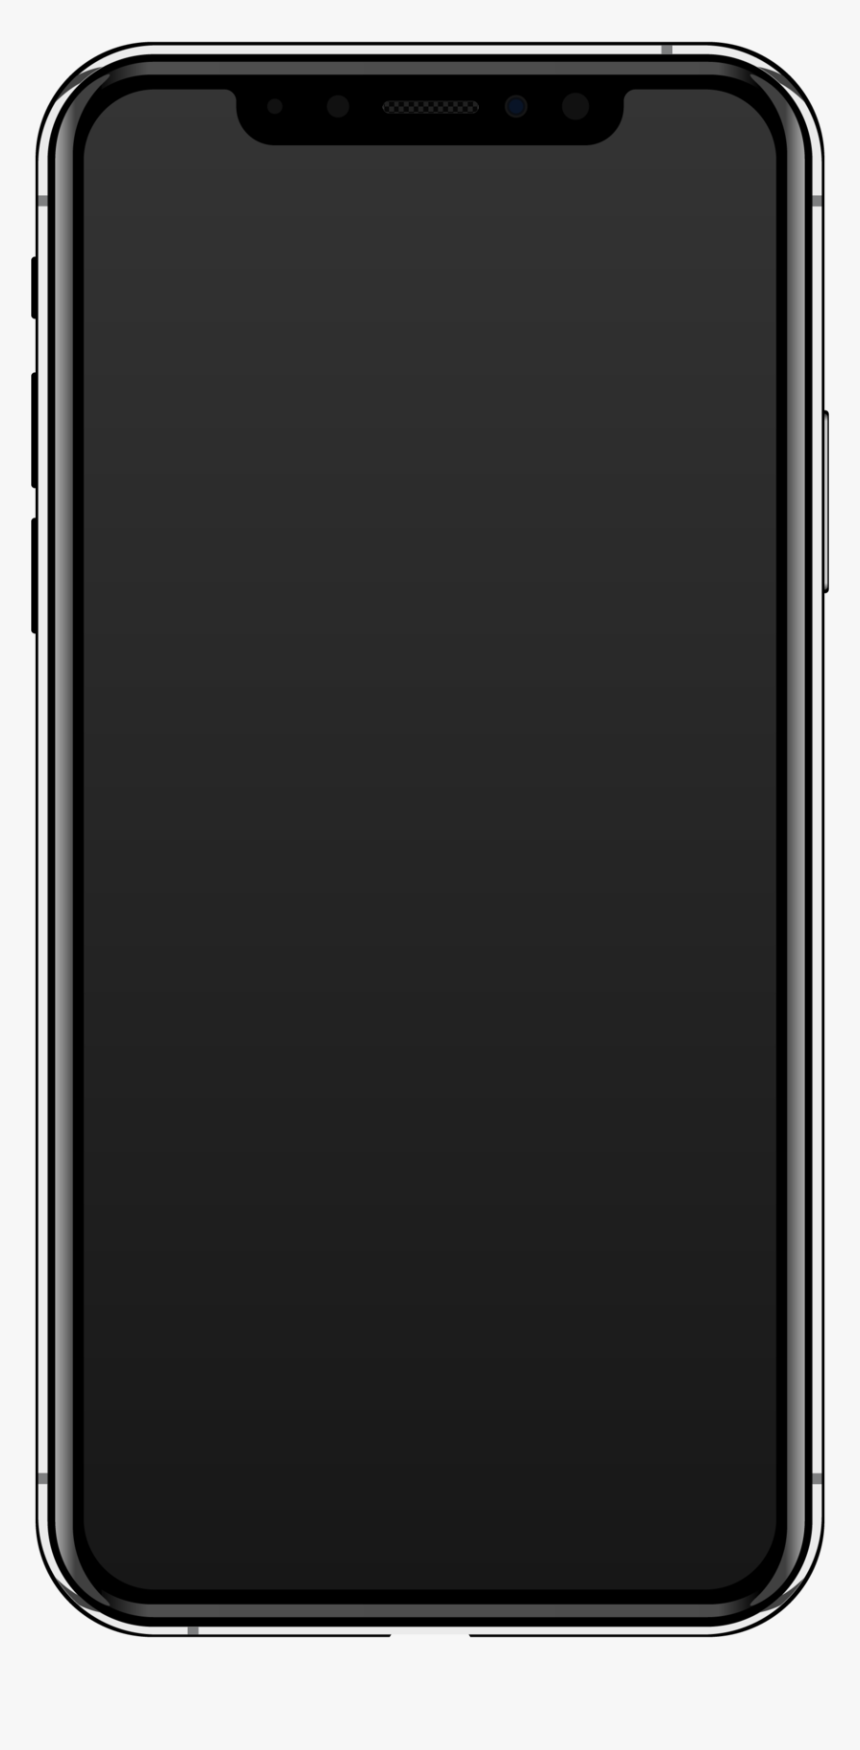 Iphone Xs - Iphone 11 Screen Png, Transparent Png, Free Download